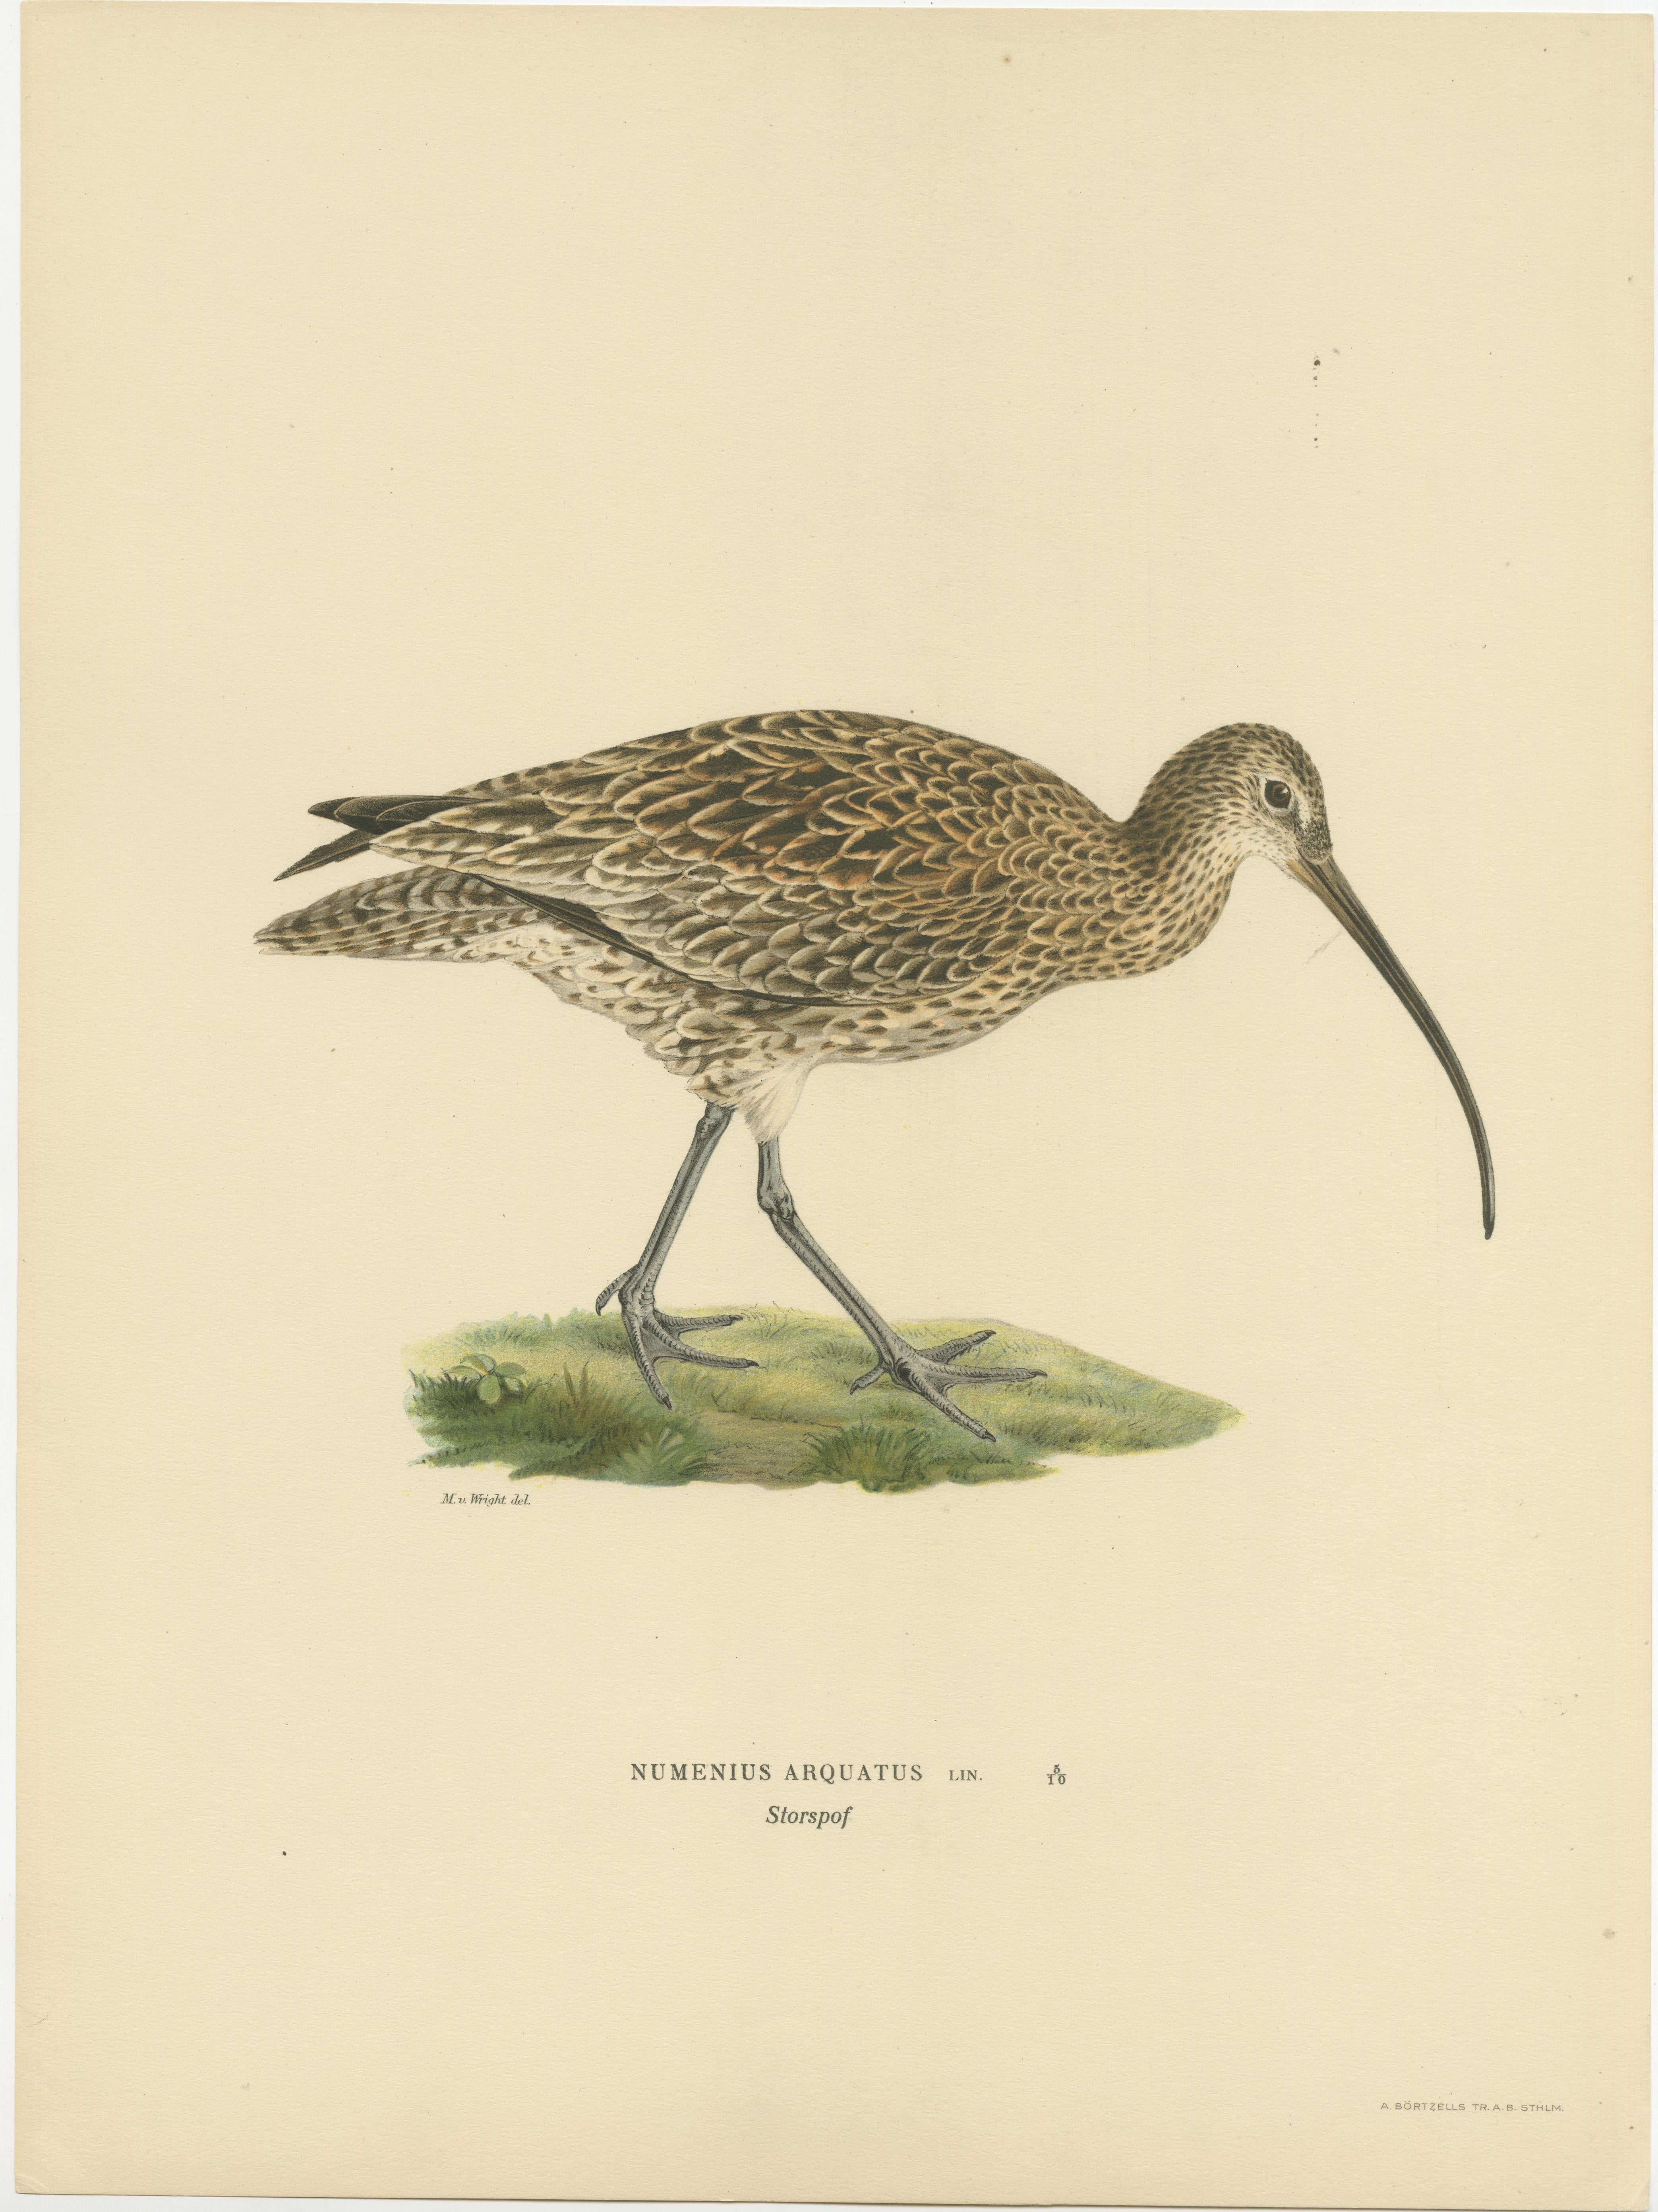 The image showcases an illustration of the Eurasian Whimbrel (Numenius phaeopus), a bird known for its long, curved beak and mottled brown plumage, which allows it to blend into its marshy and coastal environments. This specific print is part of a